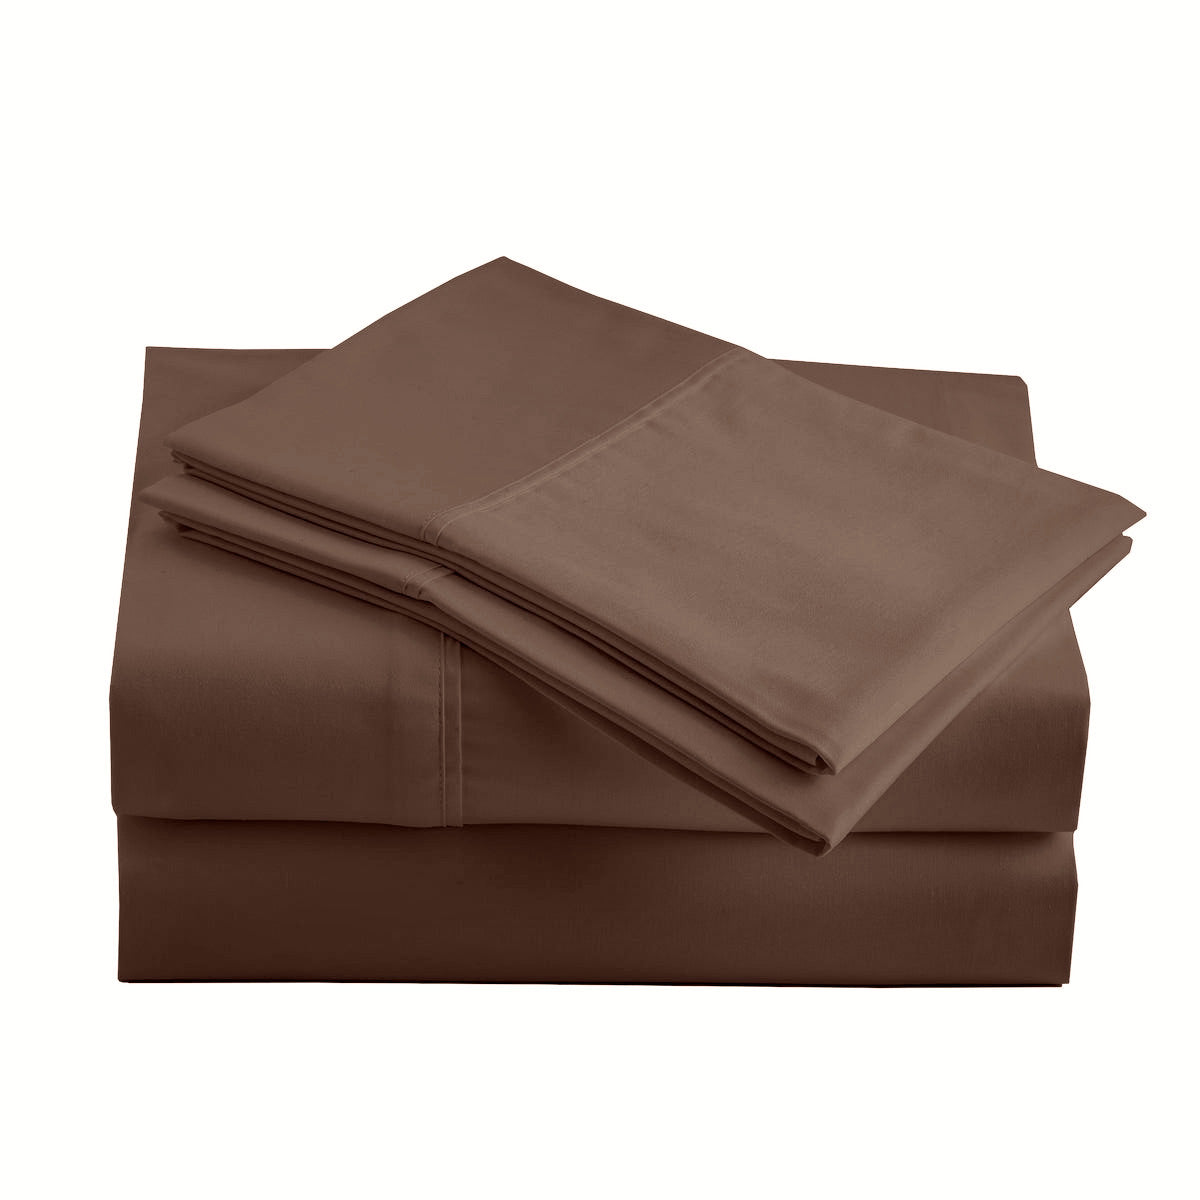 600 Thread Count Sateen Bed Sheet Set | Chocolate